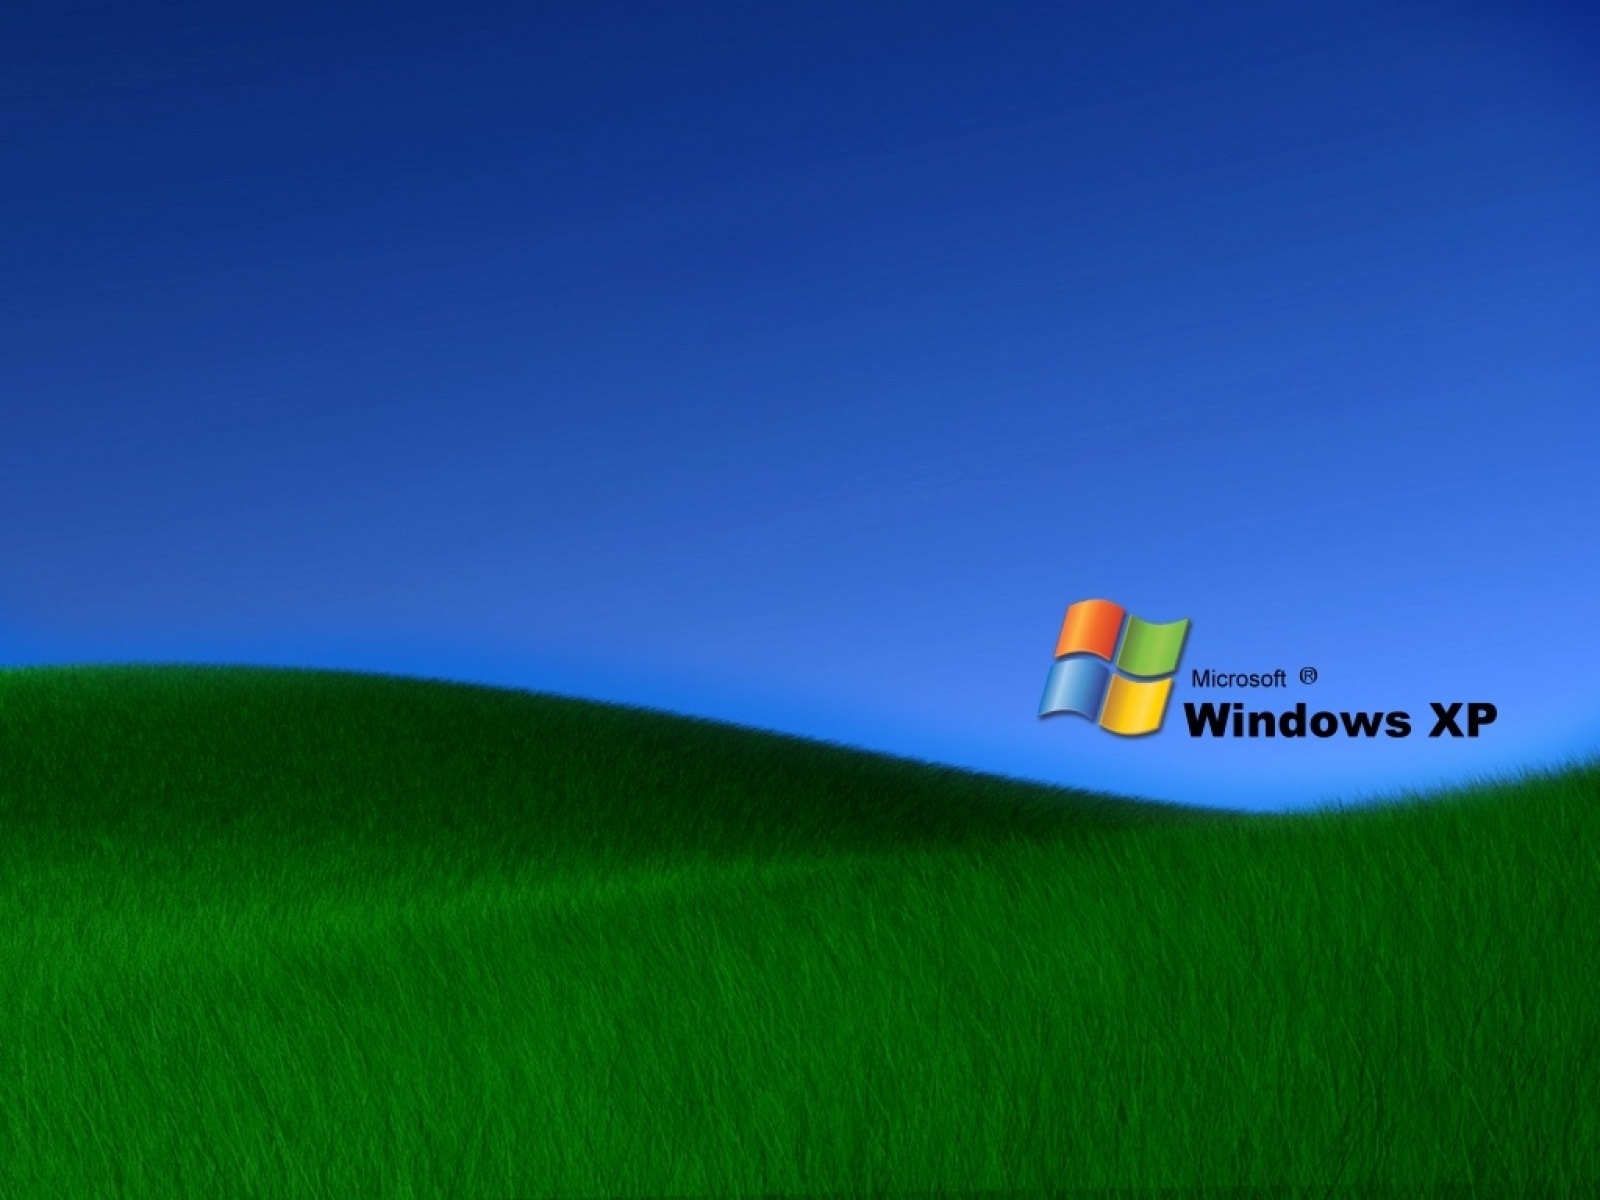 Free download Windows XP 50 Wallpapers 7866 [1600x1200] for your